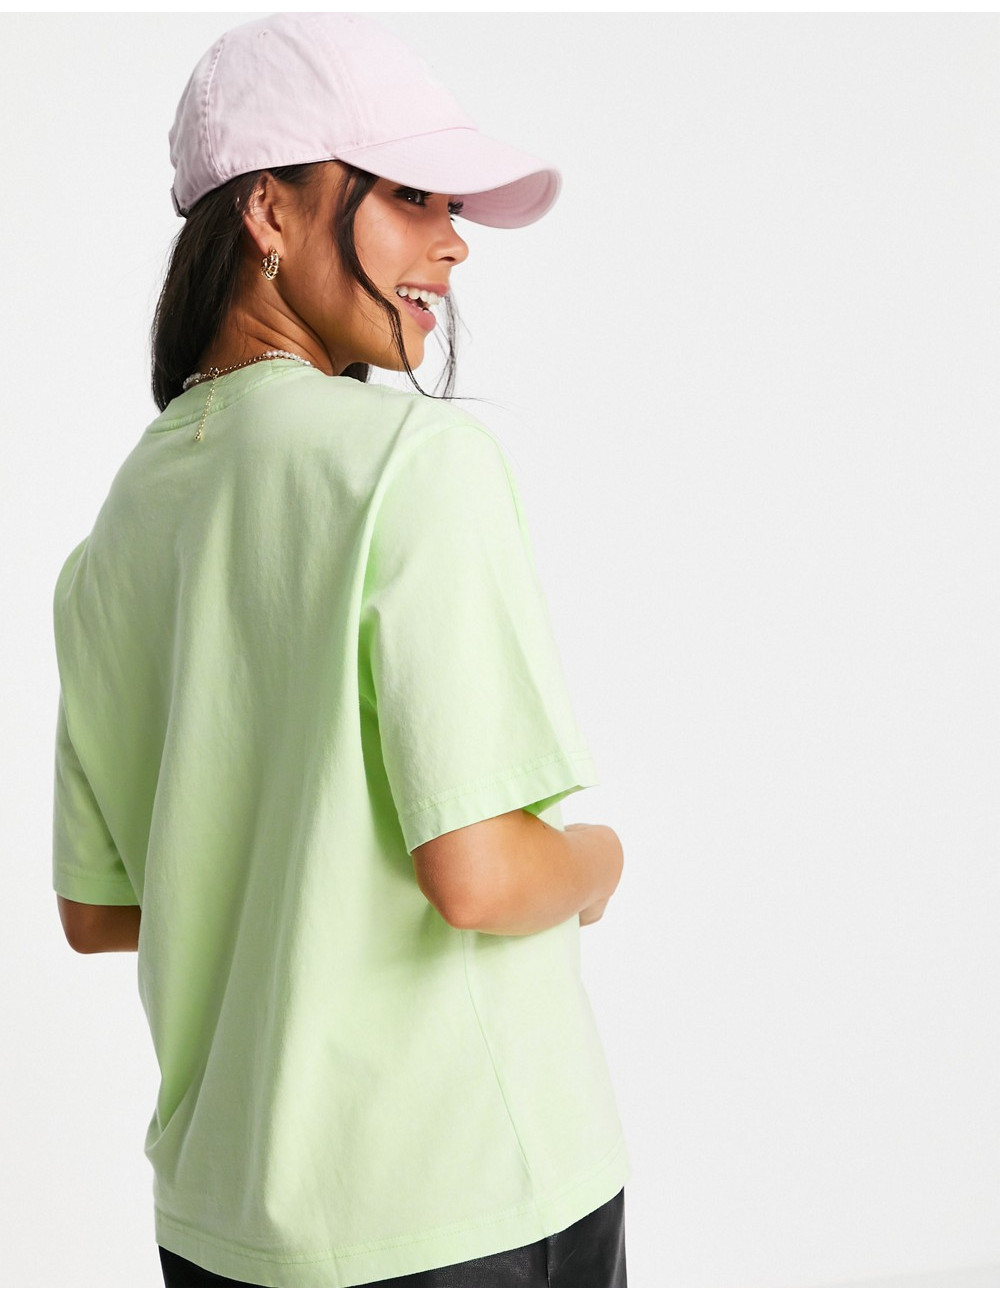 Nike washed t-shirt in neon...